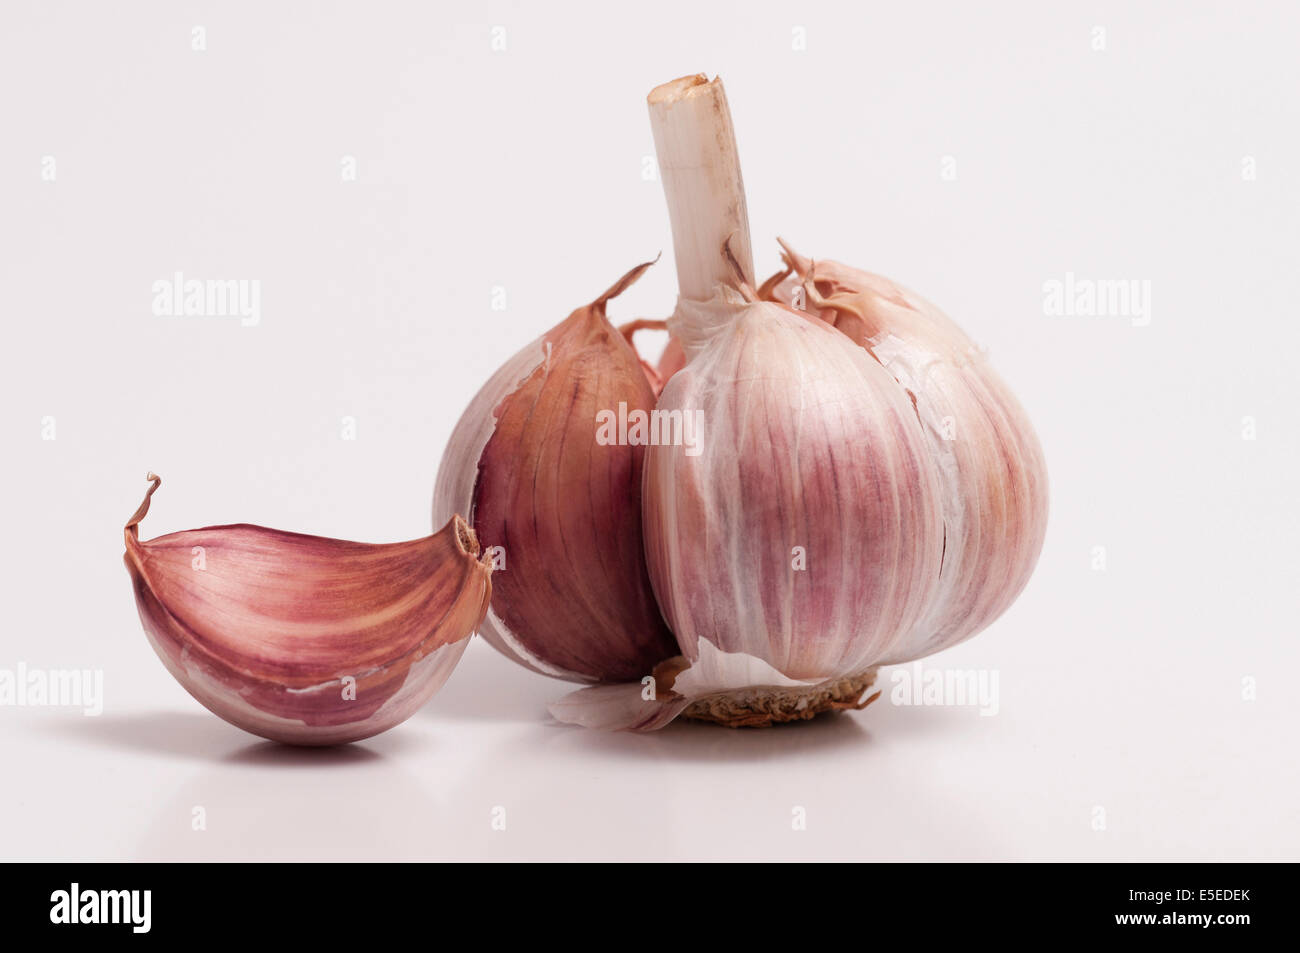 A garlic bulb and a individual clove isolated on white background Stock Photo